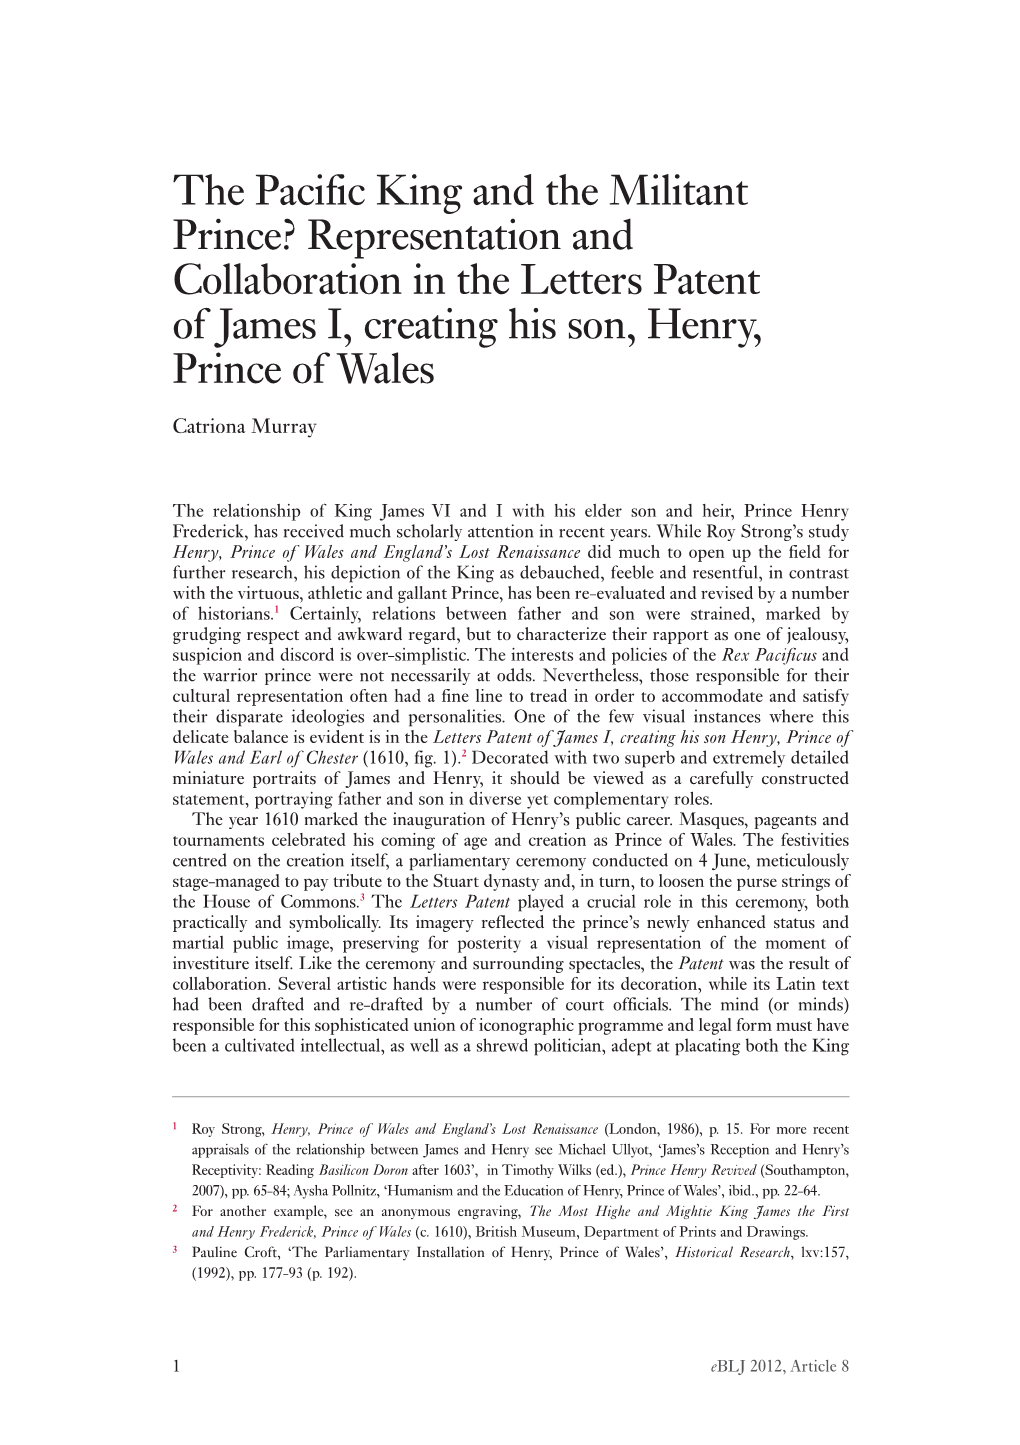 The Pacific King and the Militant Prince? Representation and Collaboration in the Letters Patent of James I, Creating His Son, Henry, Prince of Wales